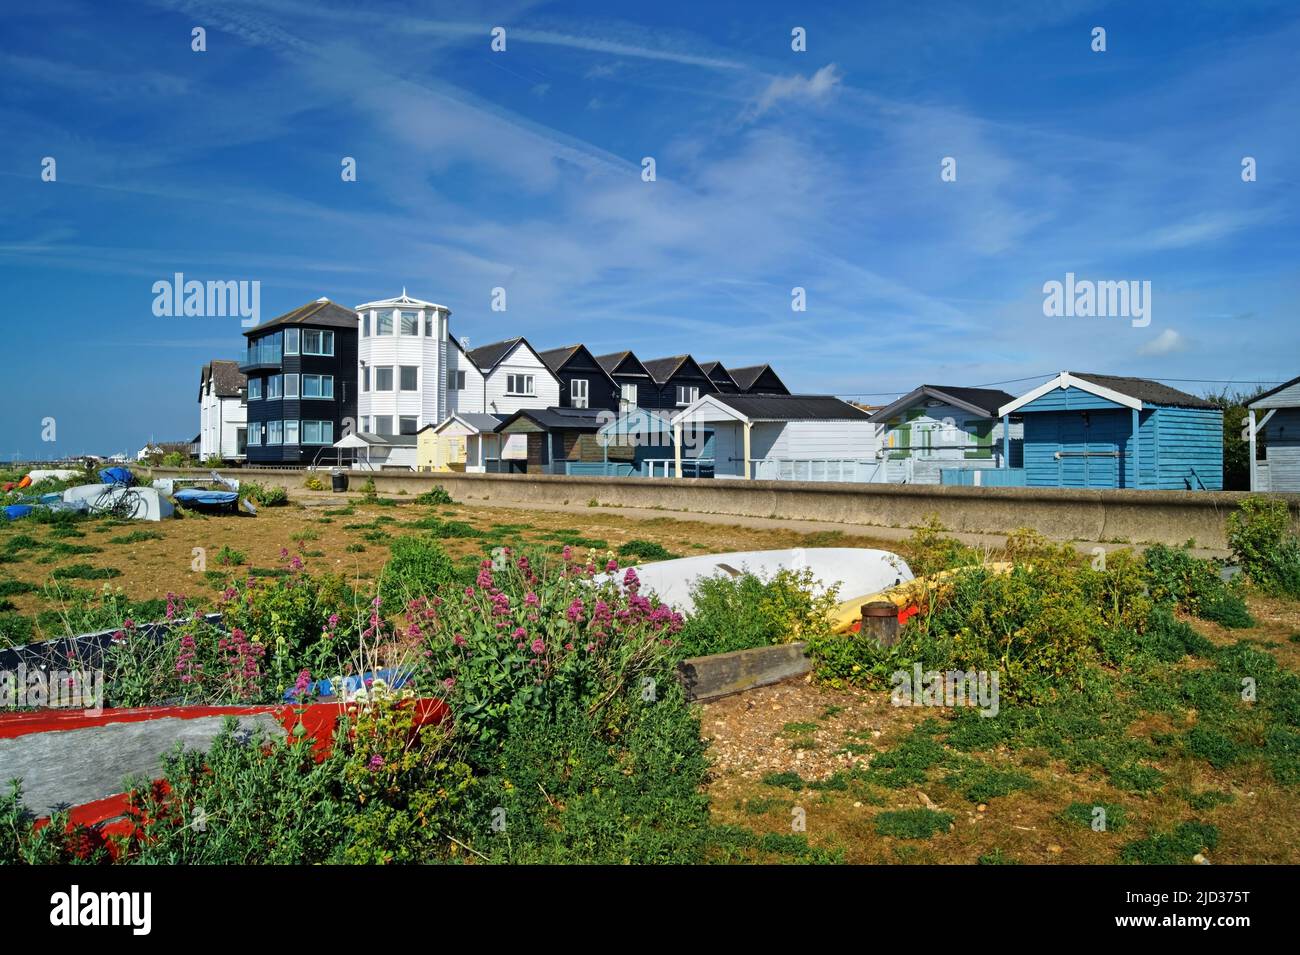 UK, Kent, Whitstable Beach Huts, Overturned Boats and Apartments Stockfoto